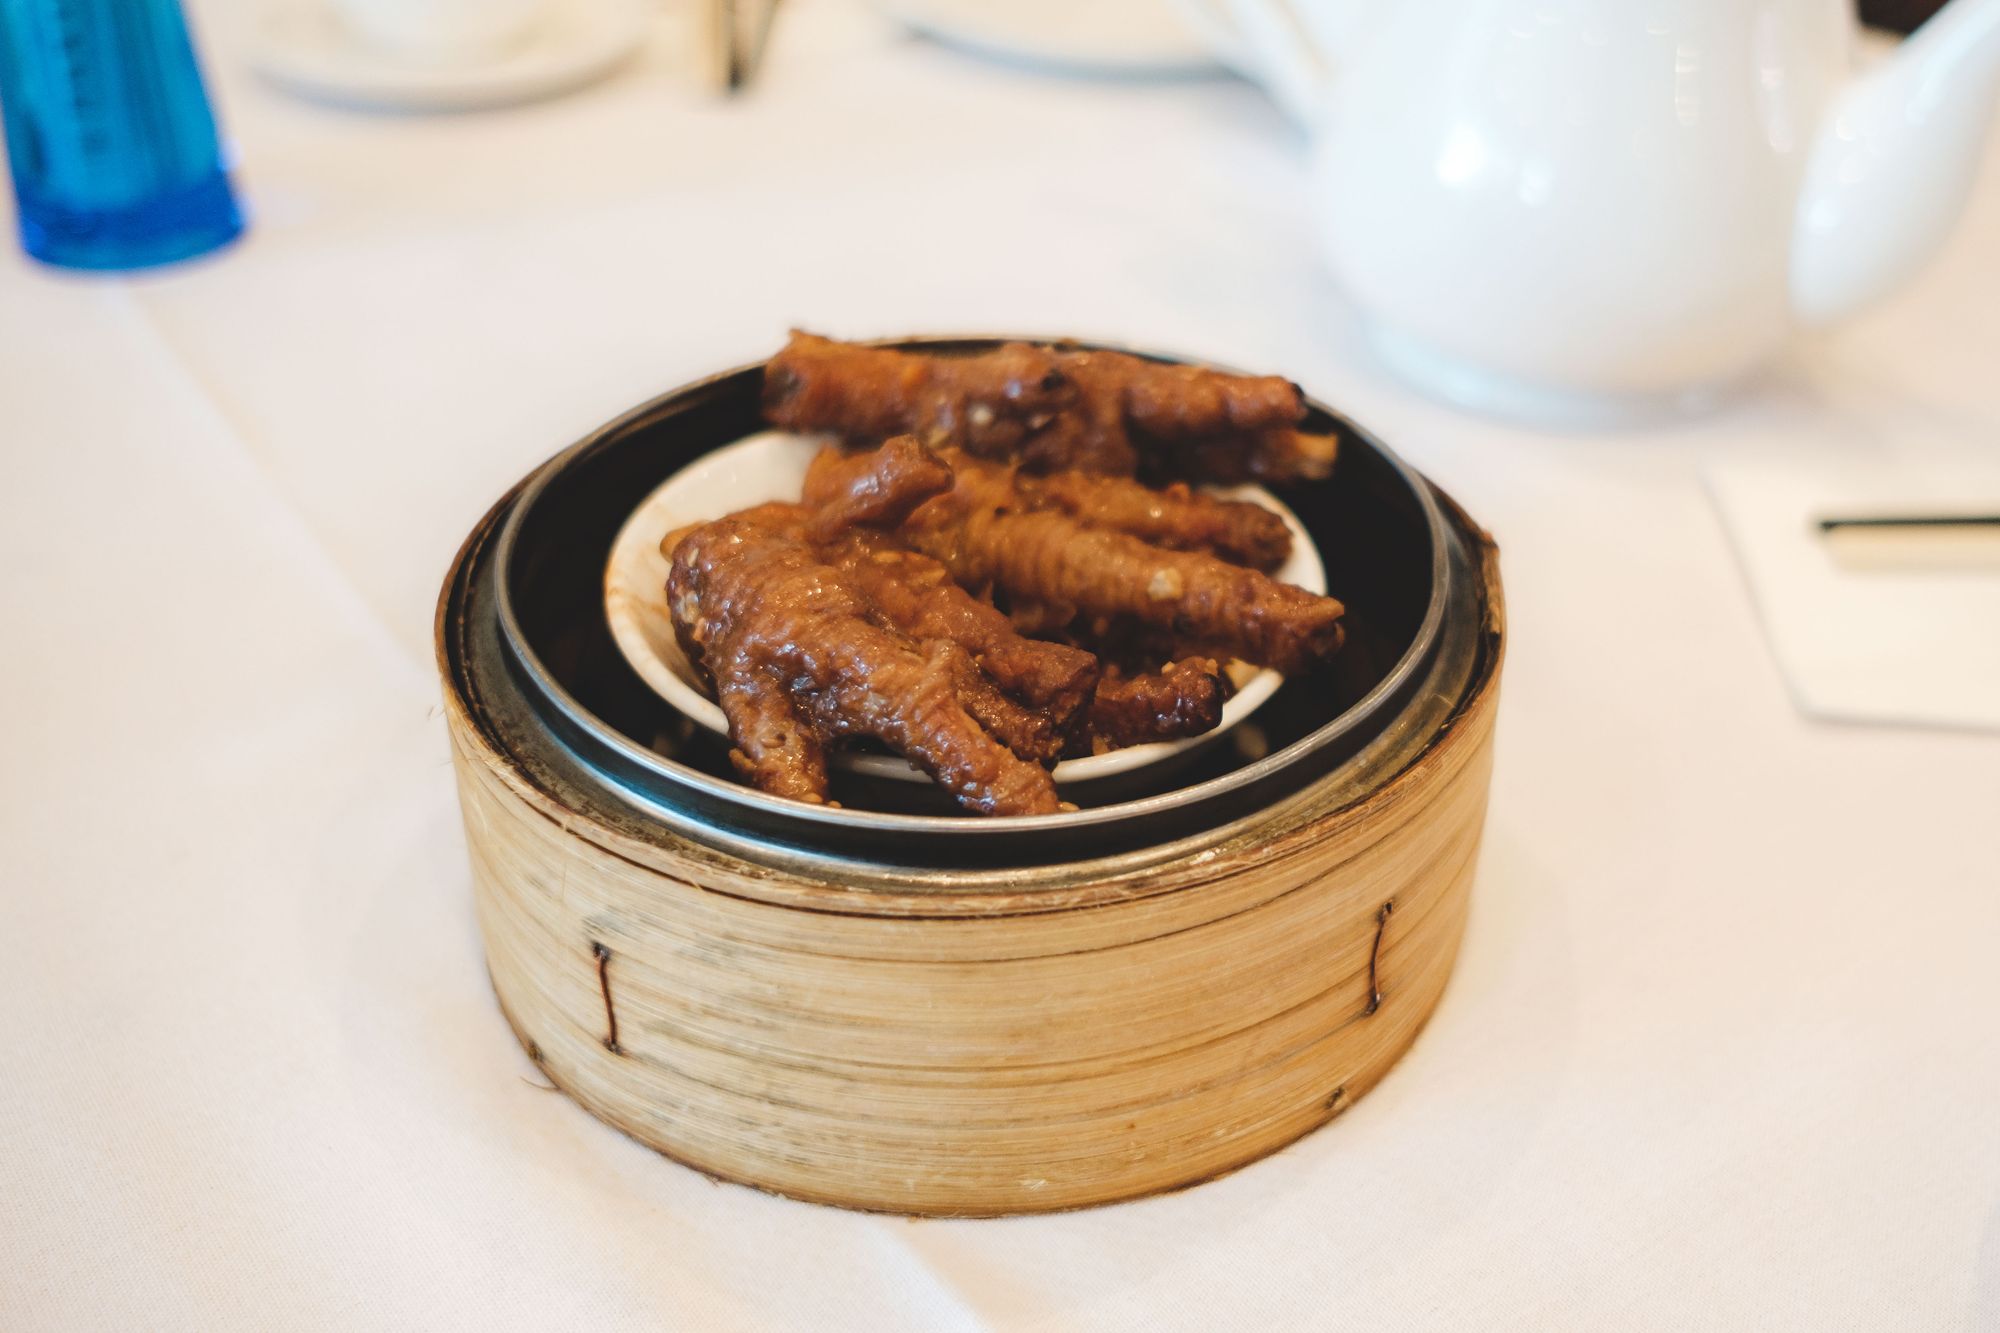 Sun Sui Wah – Chicken Feet with Black Bean and Sesame Oil